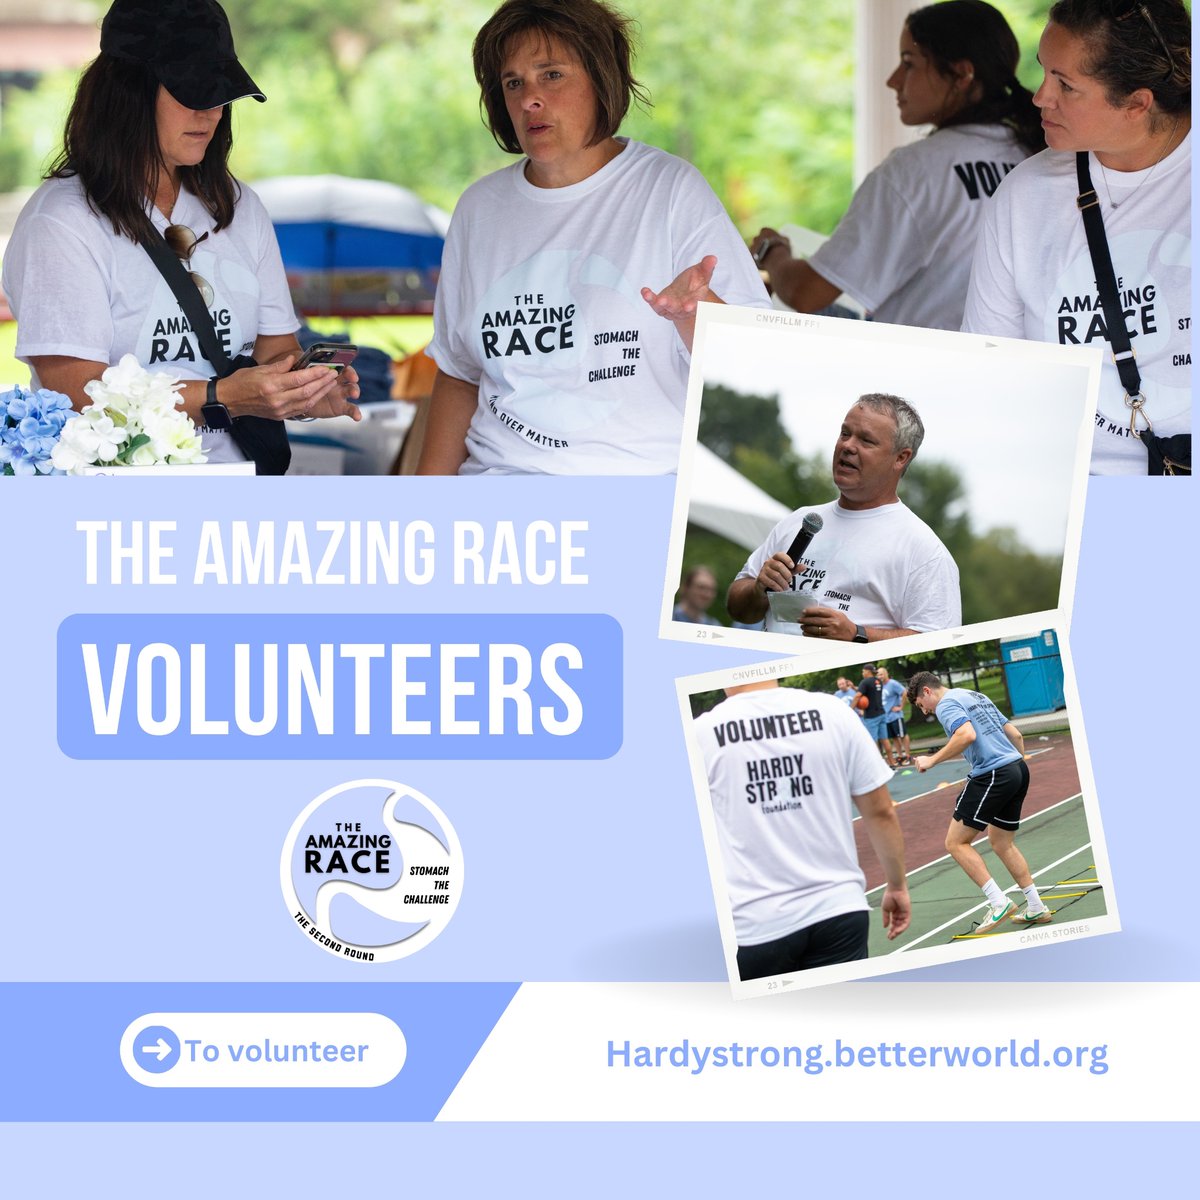 Our volunteers are the backbone of the Amazing Race and help make it all possible! Sign up and join us as a volunteer to make this year’s event come to life!